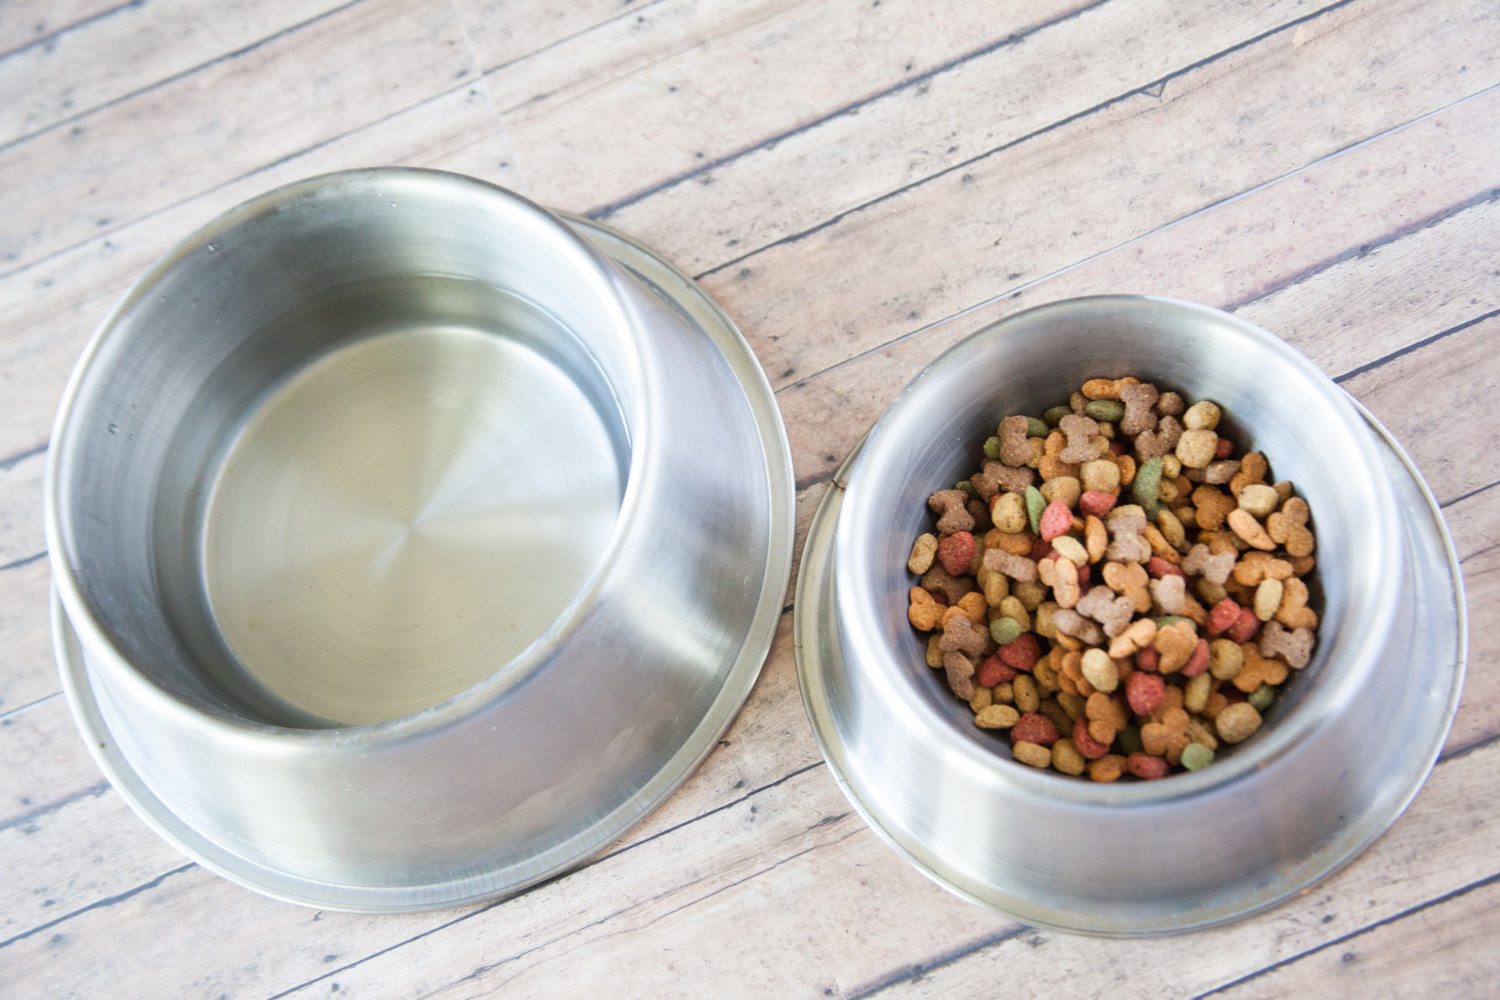 a pet's food and water bowl